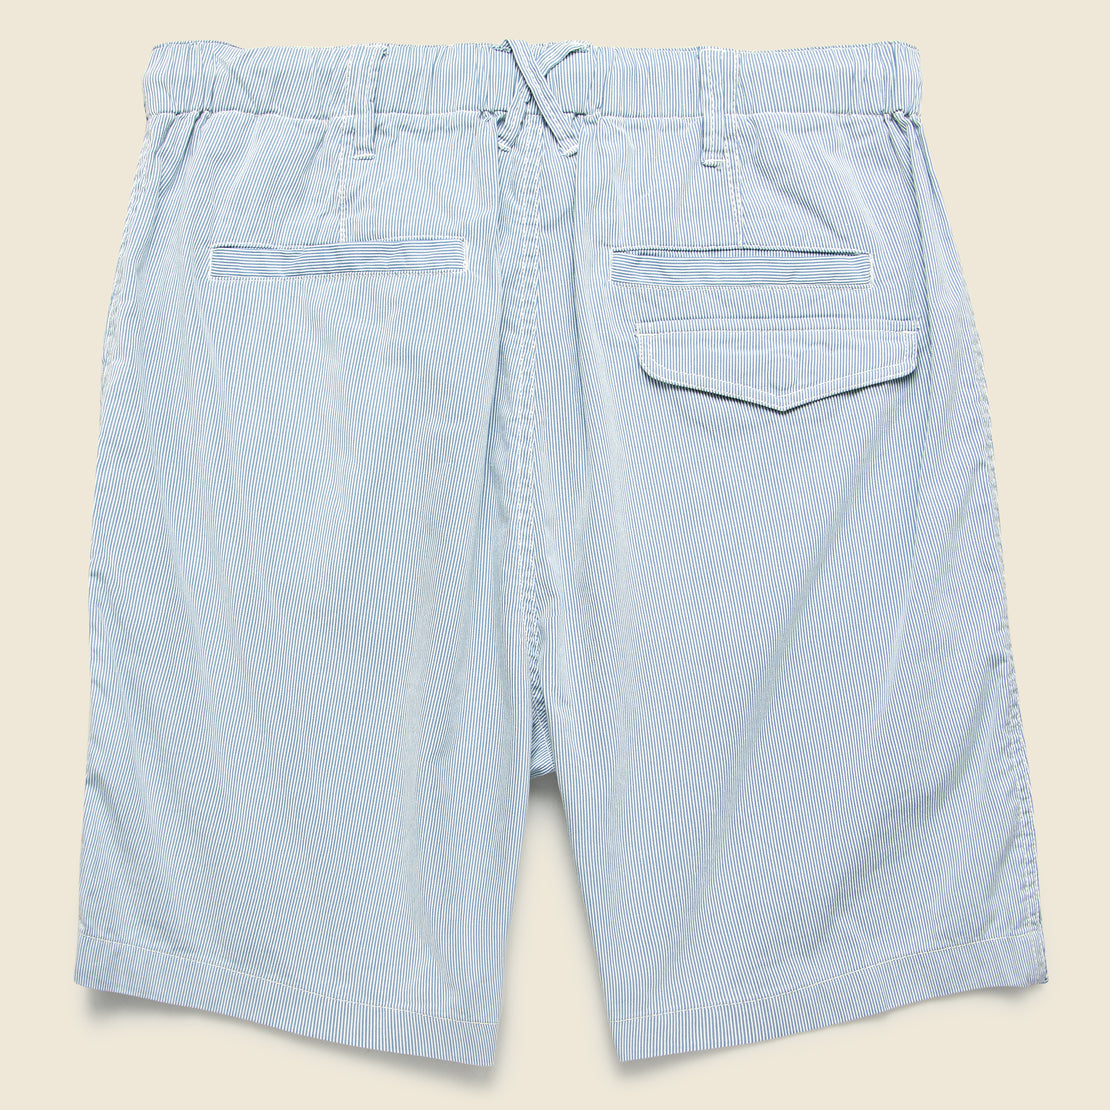 Pull-on Striped Short - Blue/White - Alex Mill - STAG Provisions - Shorts - Solid